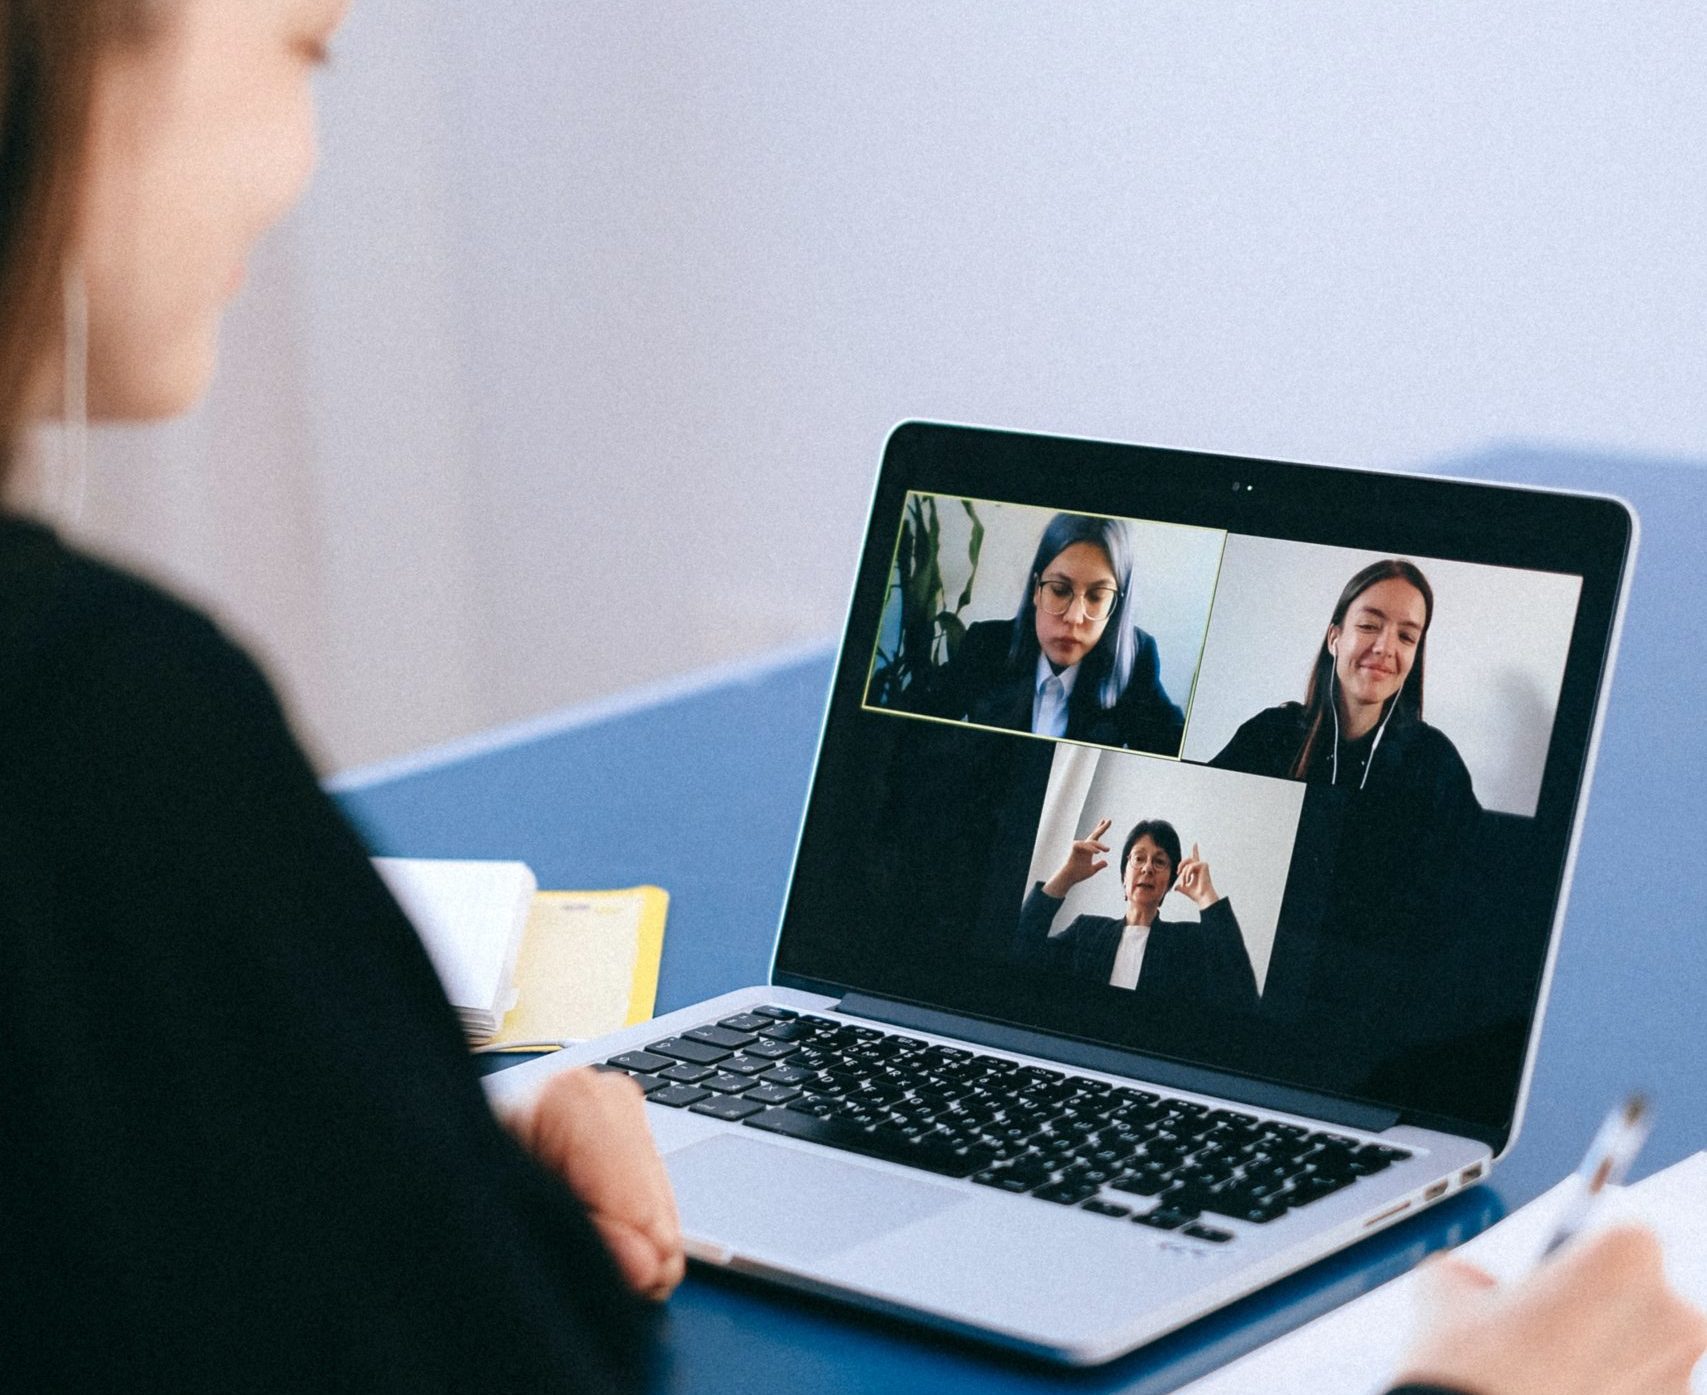 Using Video Effectively to Promote Personalisation